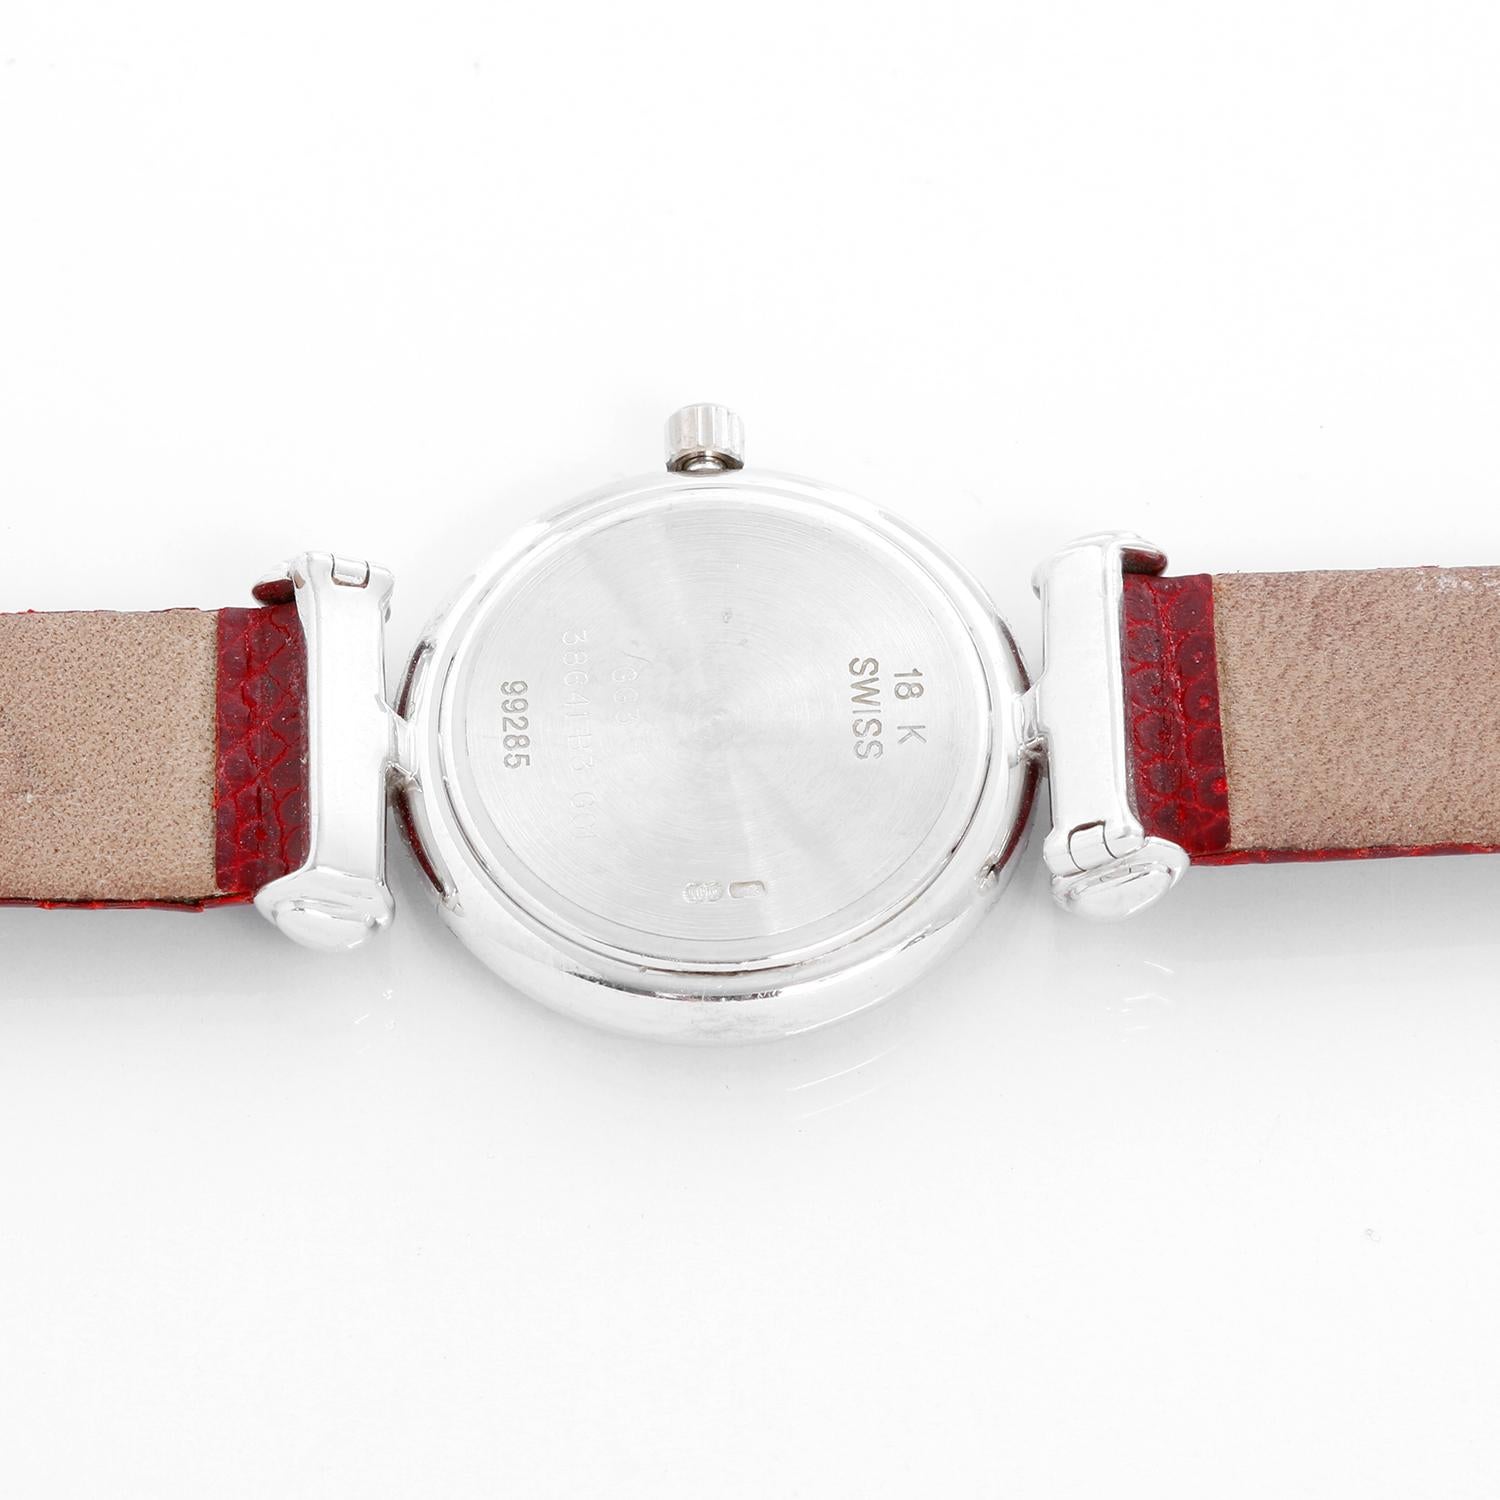 Van Cleef & Arpels Pierre White Gold Ladies Watch - Quartz. 18K white gold with diamond bezel ( 24 mm ). Ivory dial with stick and roman numerals. Red lizard strap with tang buckle . Pre-owned with Van Cleef & Arpels pouch.